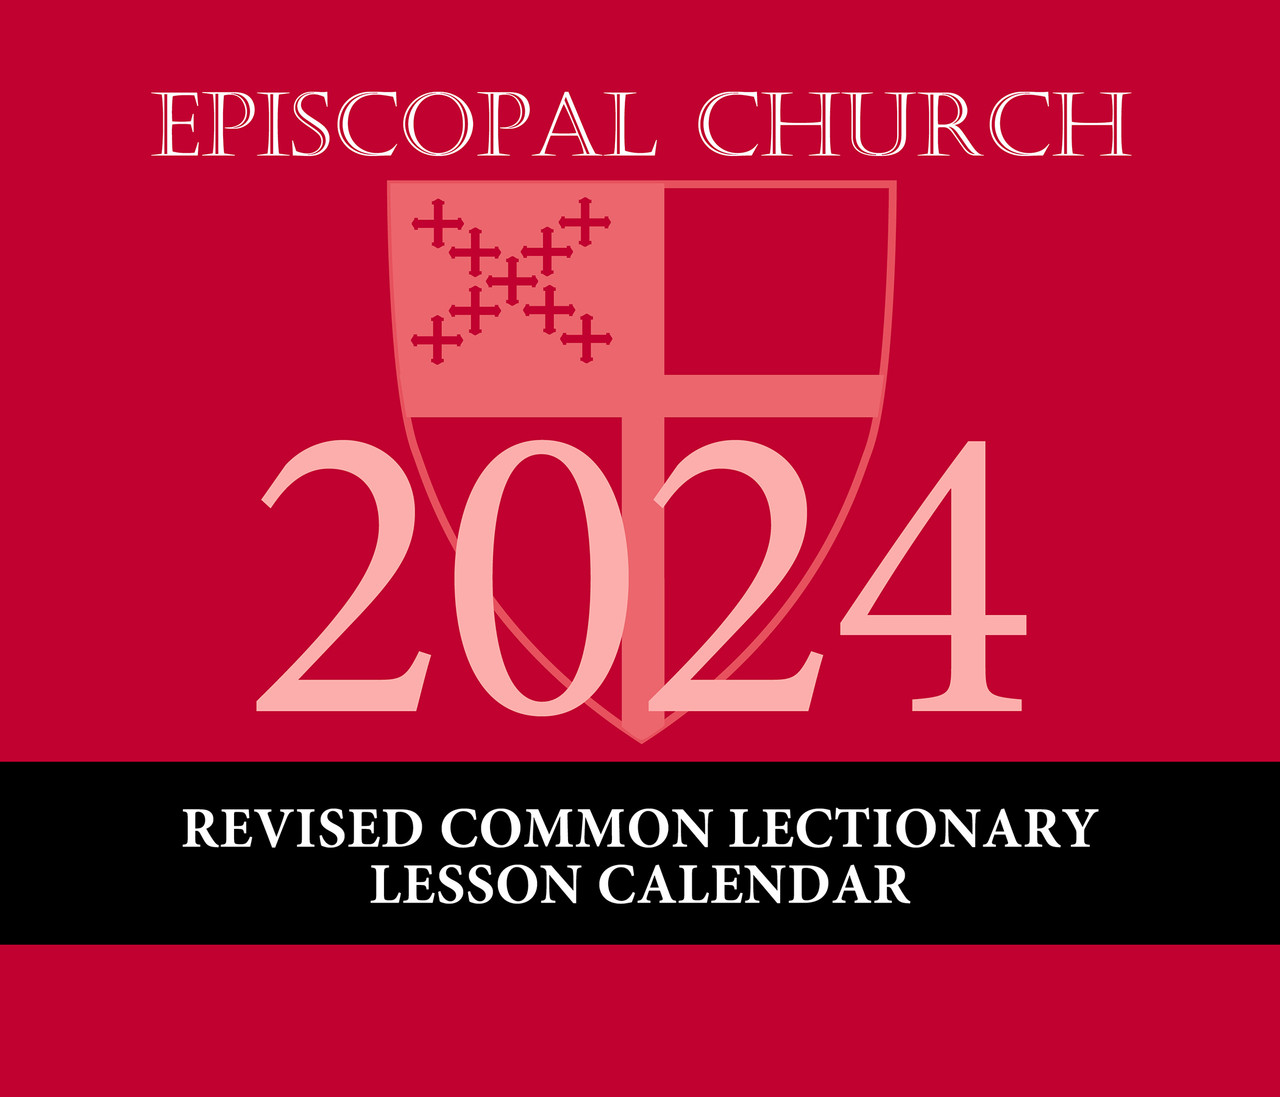 Episcopal Church Revised Common Lectionary (RCL) Lesson Calendar 2024